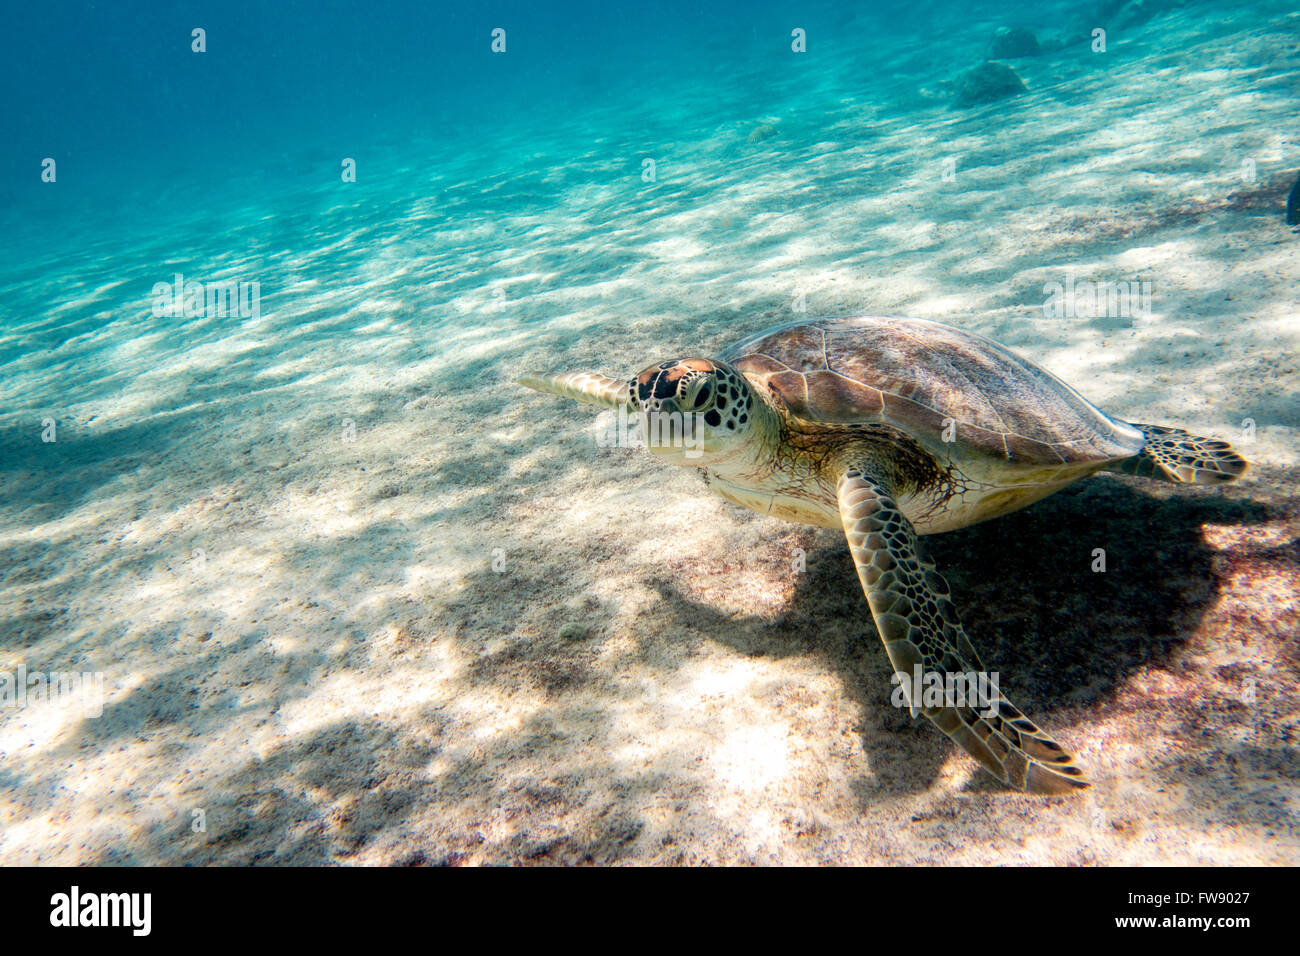 A Green sea turtle in the waters outside the Caribbean island of Bonaire Stock Photo